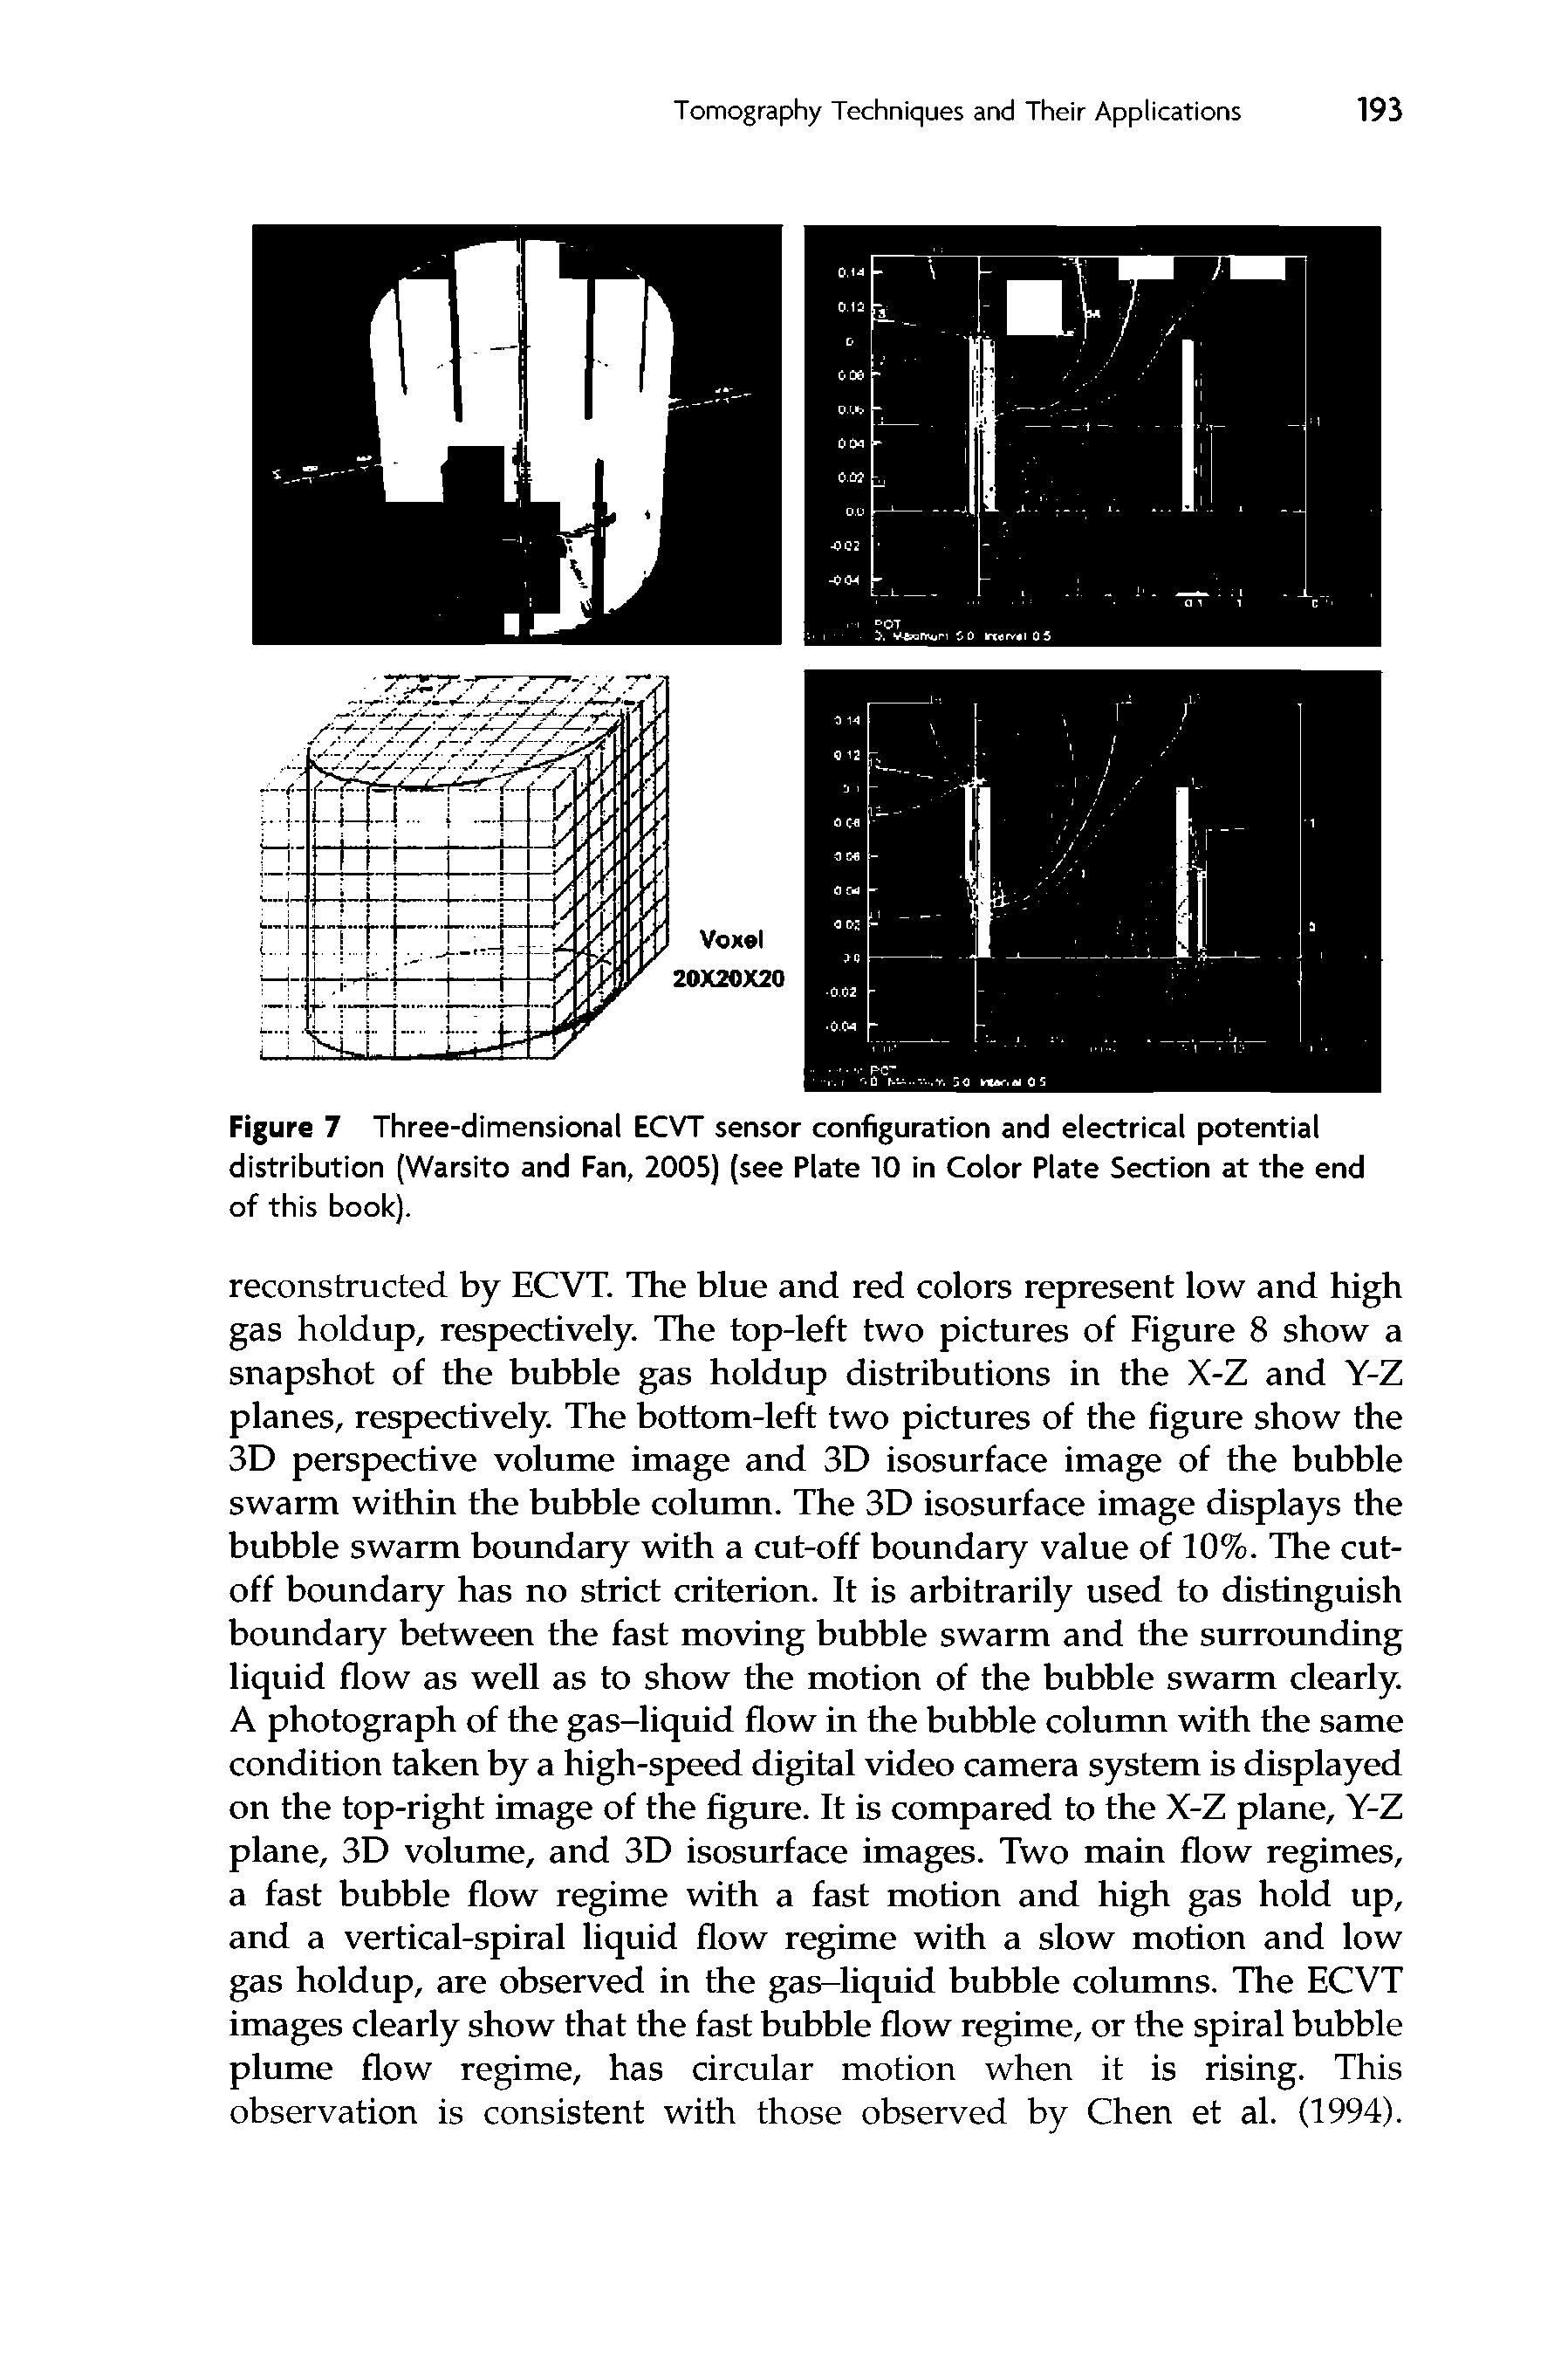 Figure 7 Three-dimensional ECVT sensor configuration and electrical potential distribution (Warsito and Fan, 2005) (see Plate 10 in Color Plate Section at the end of this book).